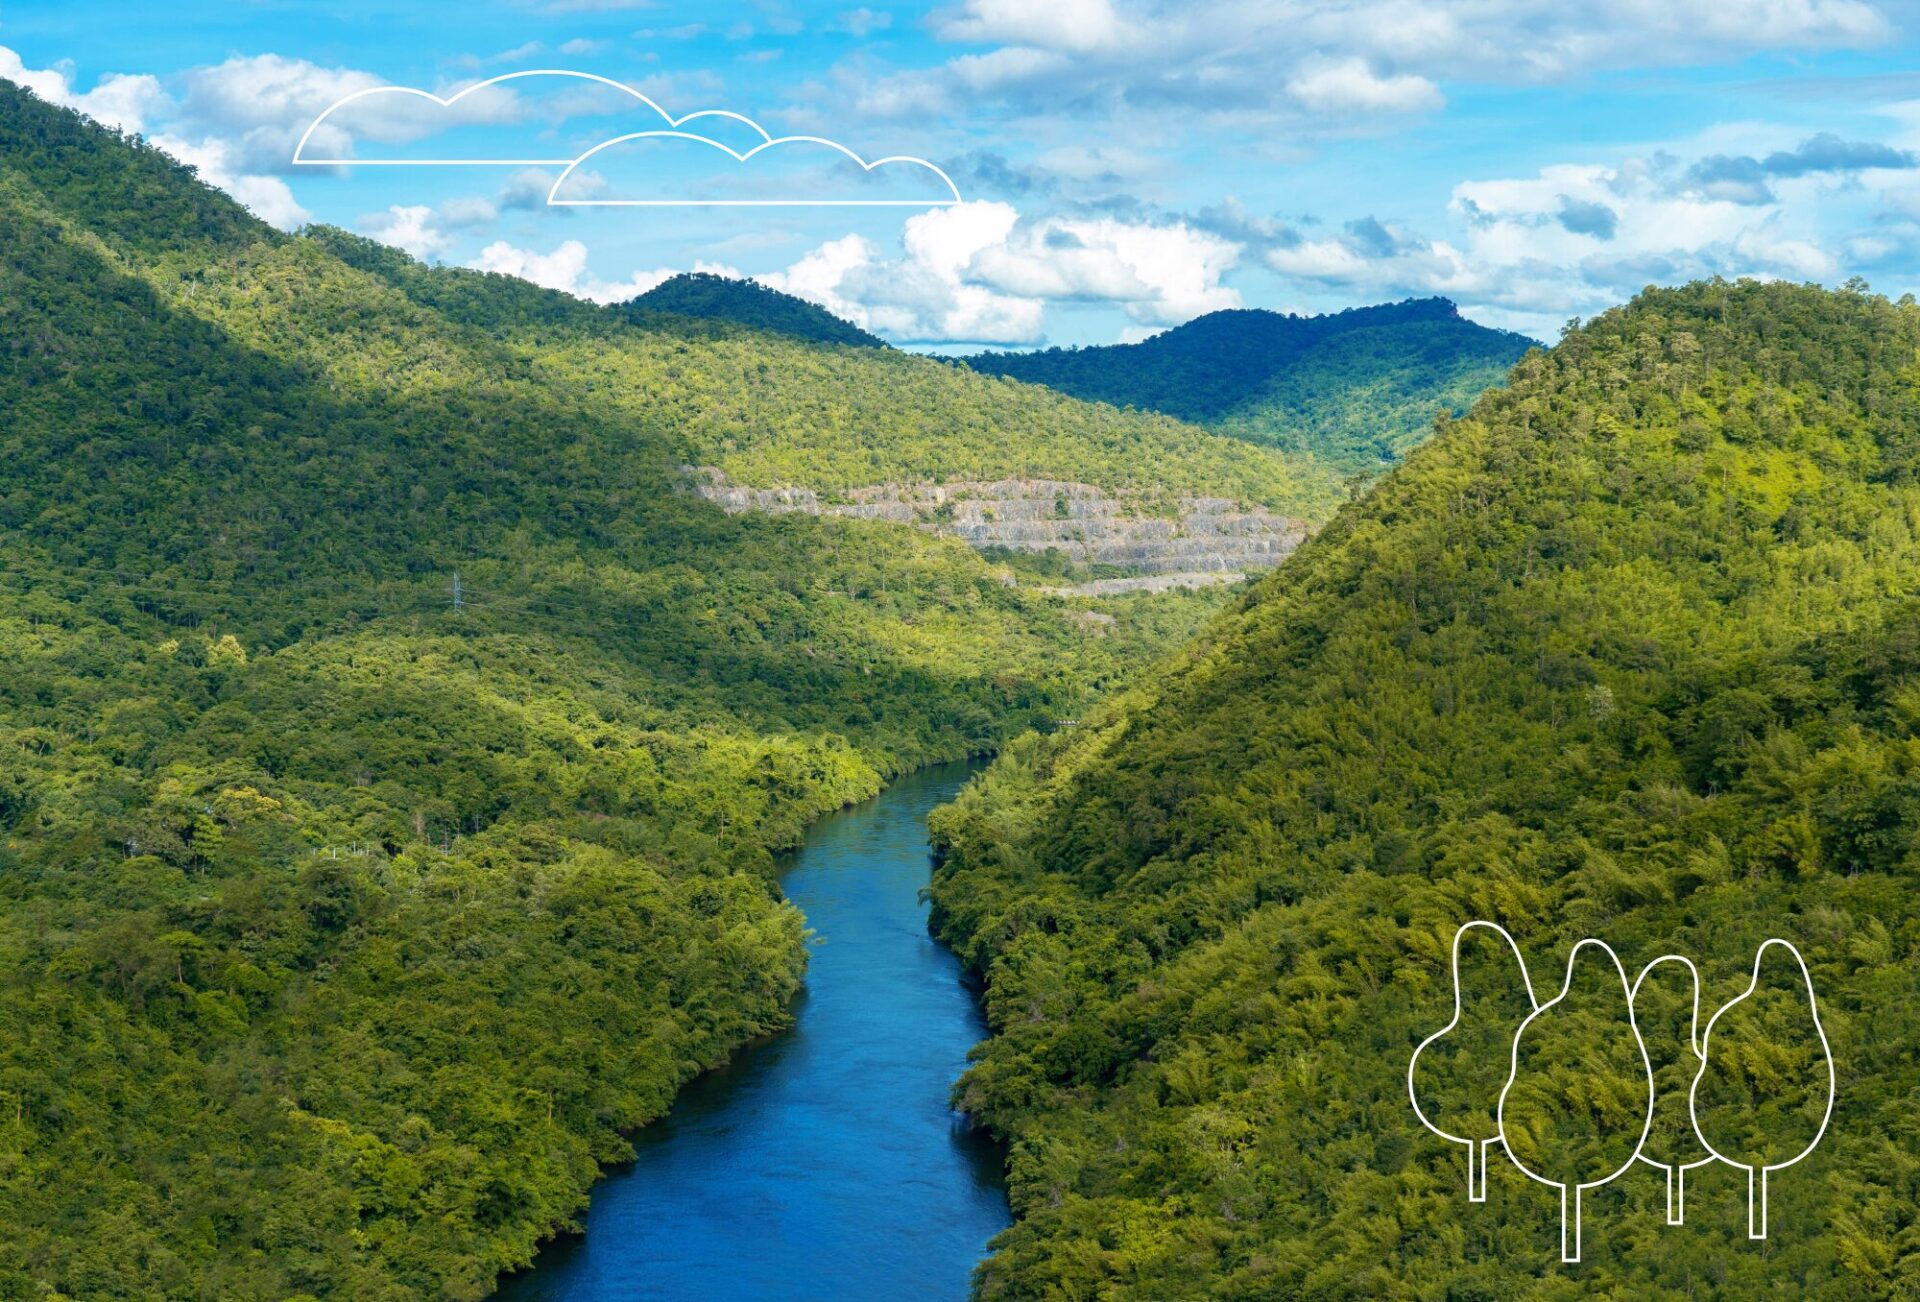 Aerial view of a river winding between 2 hills covered with forest. A bright blue cloudy sky on the horizon.